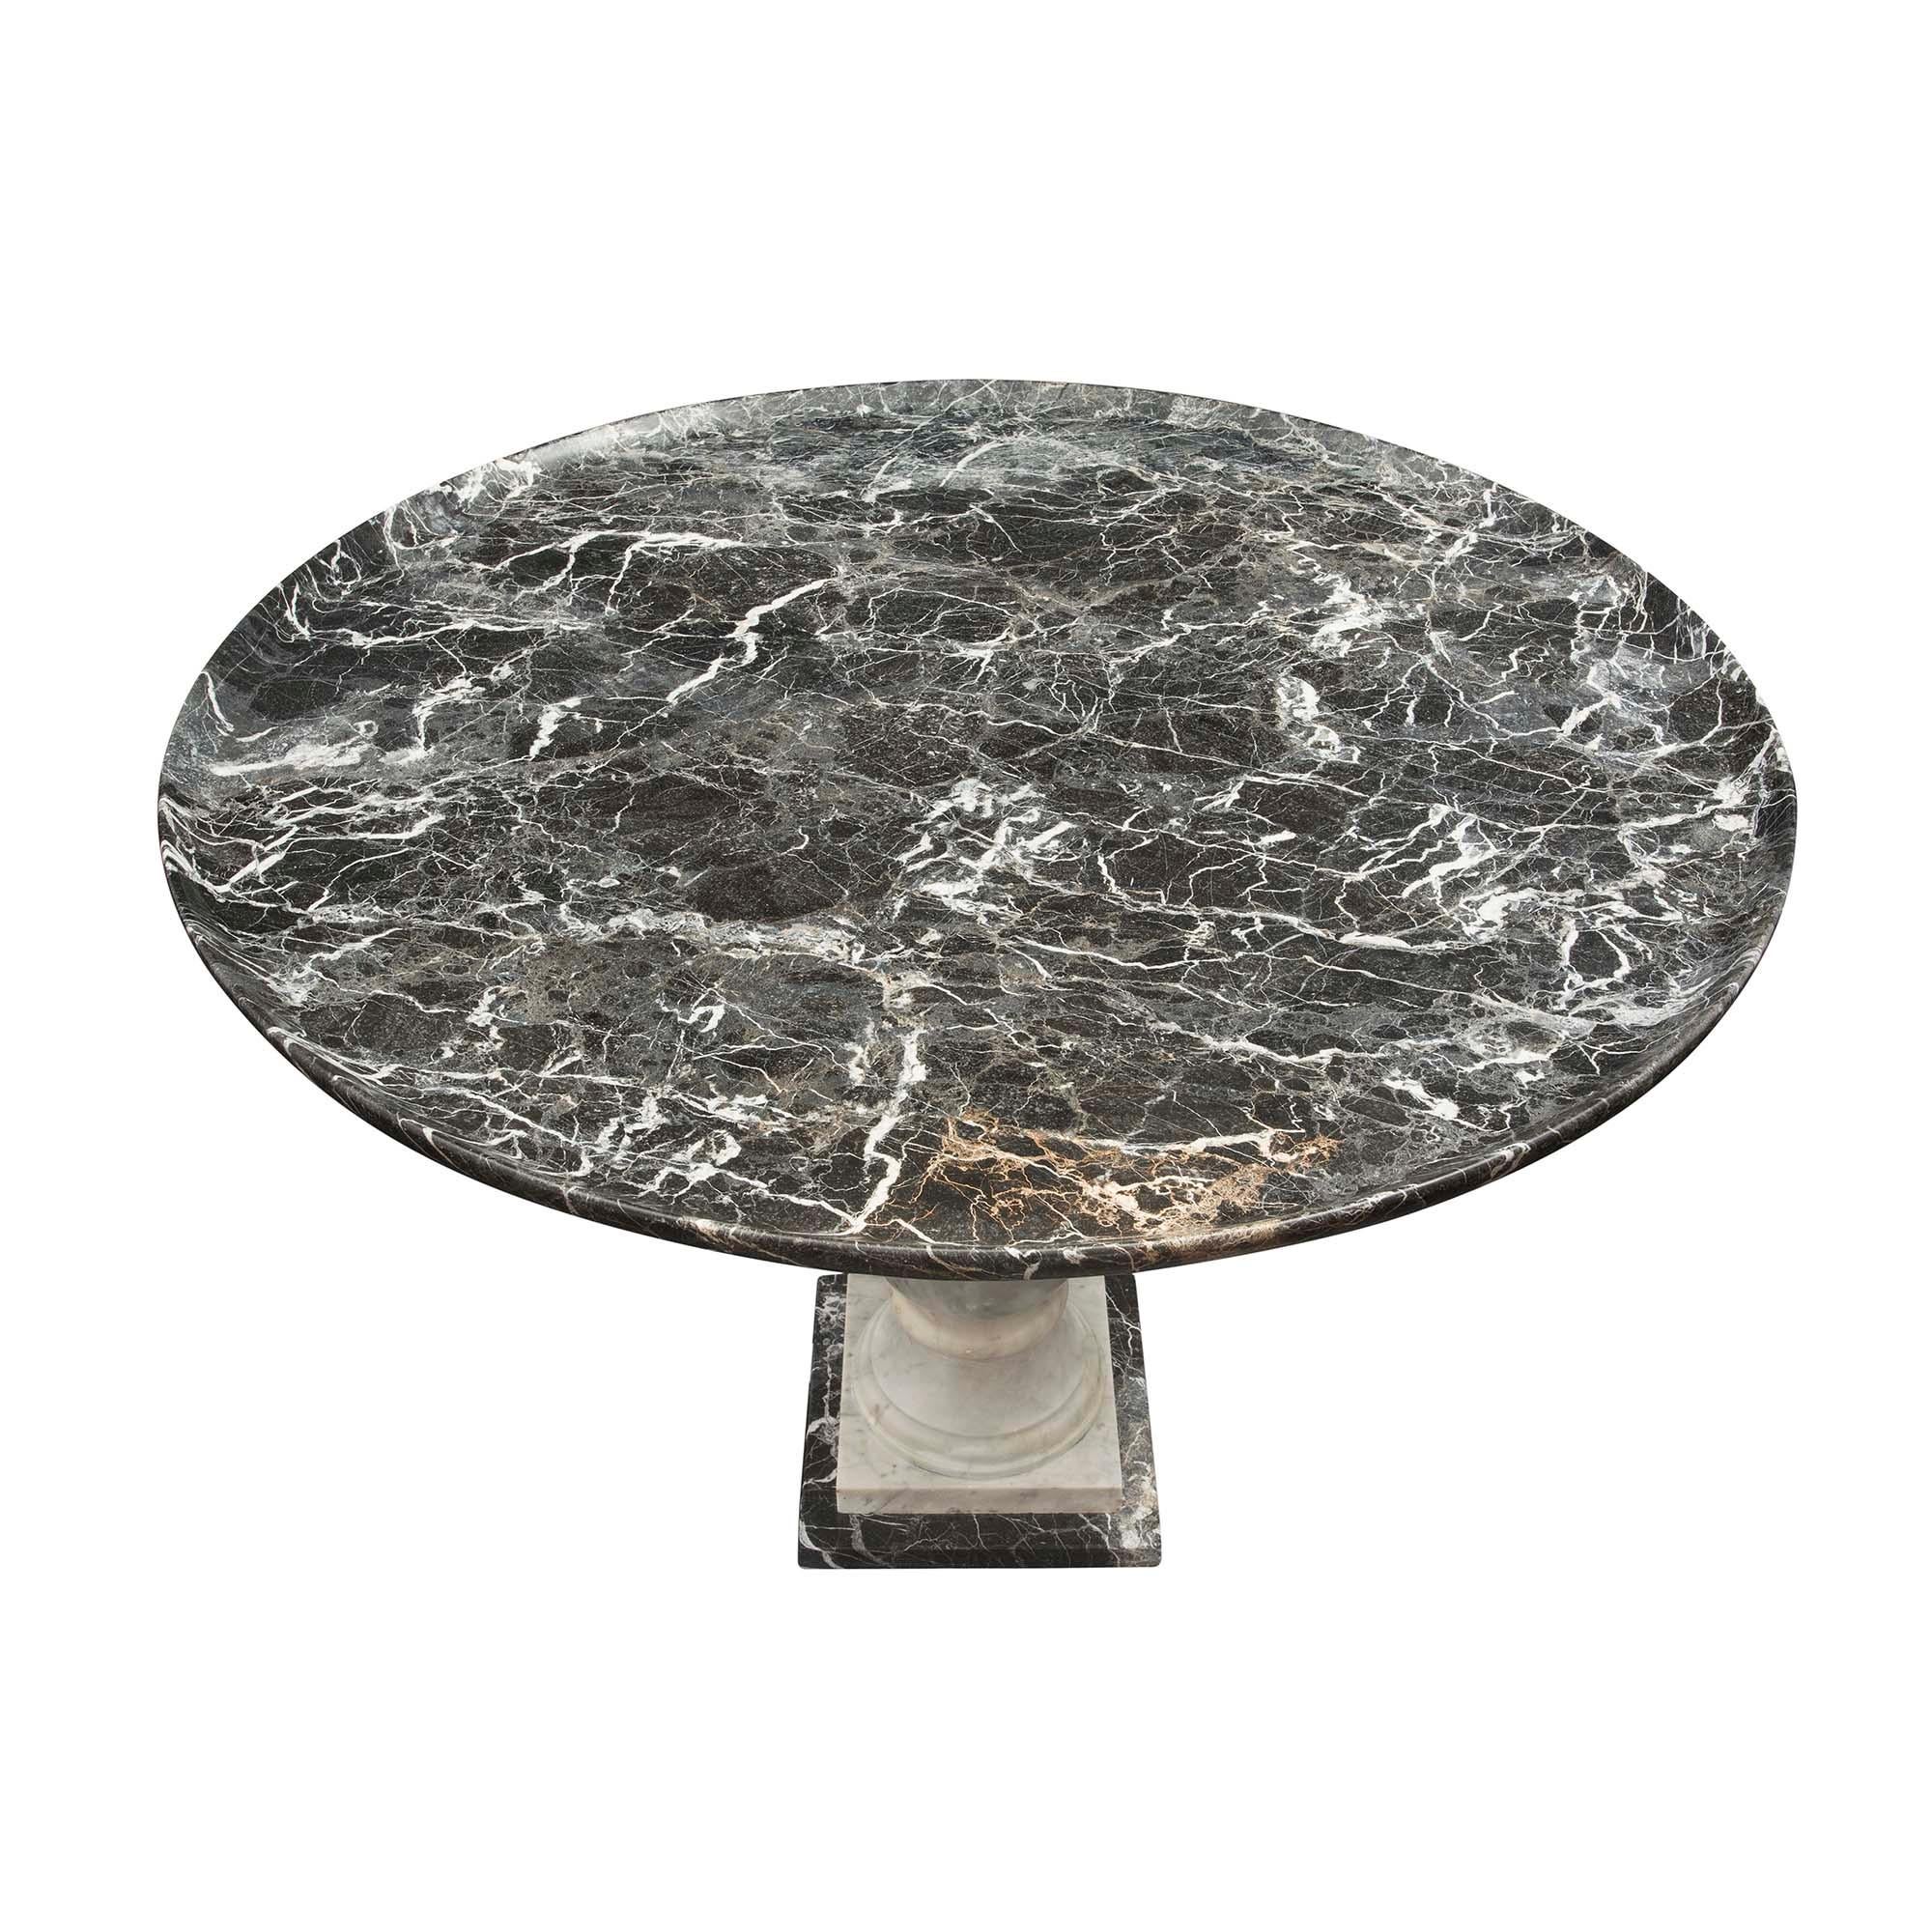 A very elegant and two part Italian Neo-Classical st.Saint-Maximin marble side table. The table is raised by a square Saint-Maximin base below an additional white Carrara marble square plinth with a circular mottled baluster fut. Above lays the